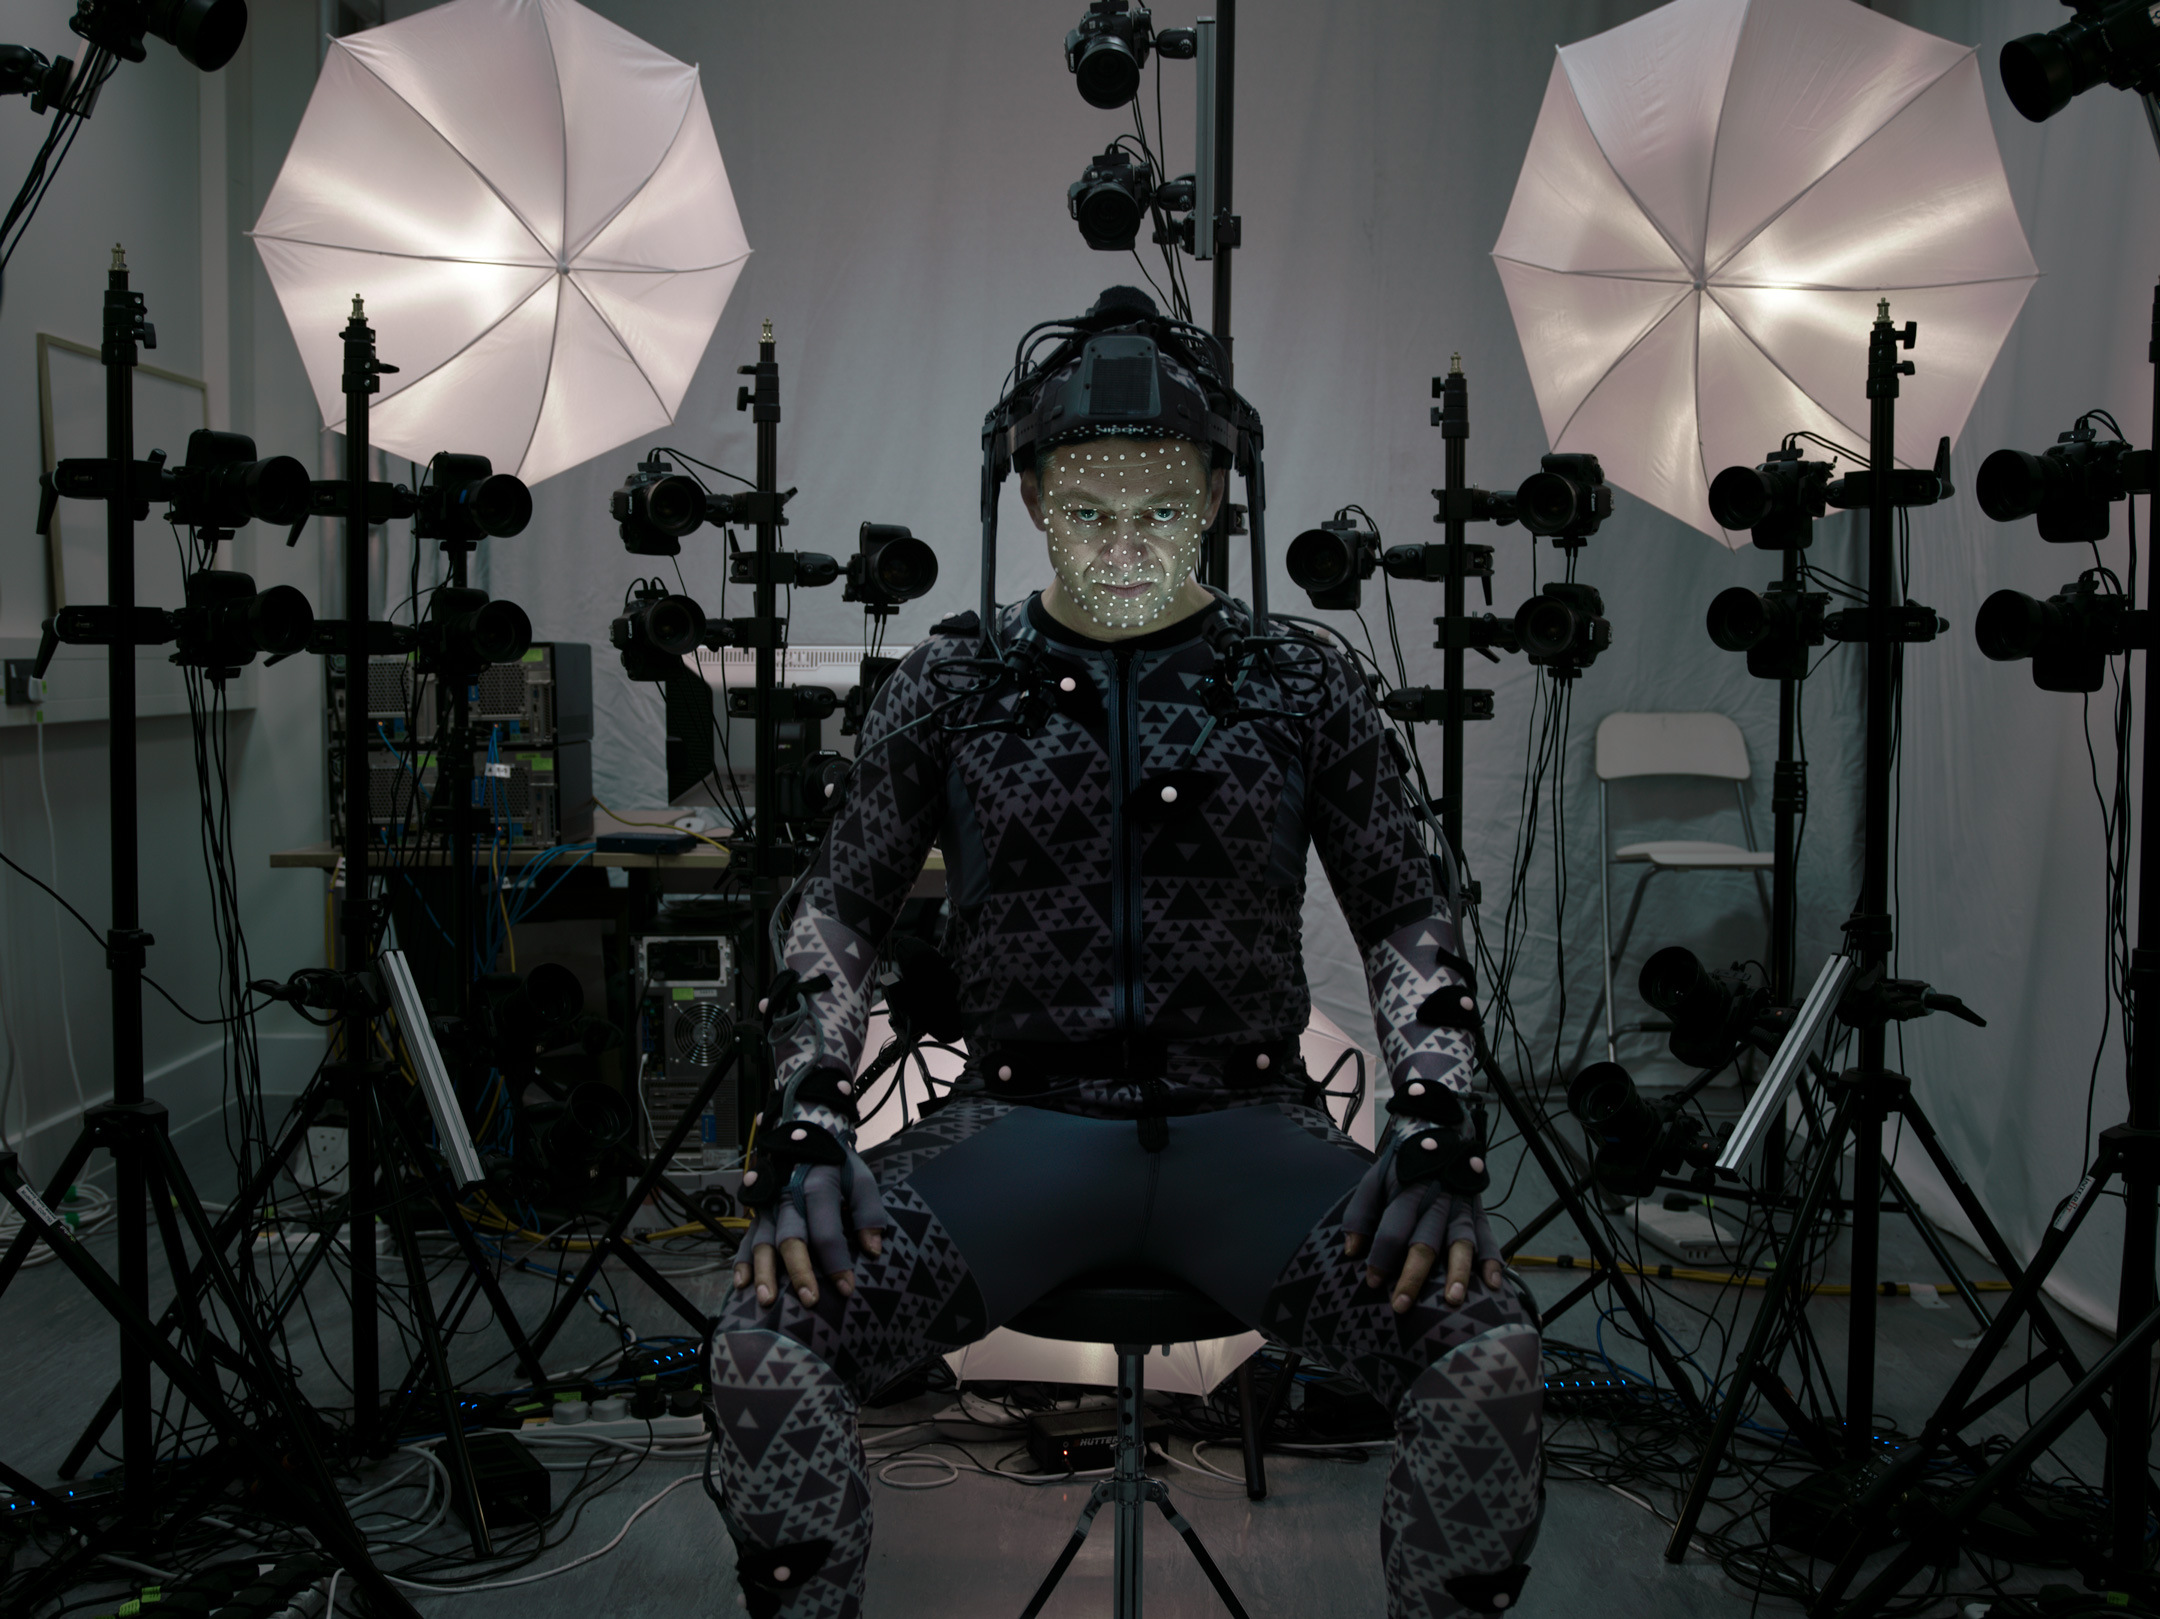 Star Wars: The Force Awakens - Who is Andy Serkis Playing?